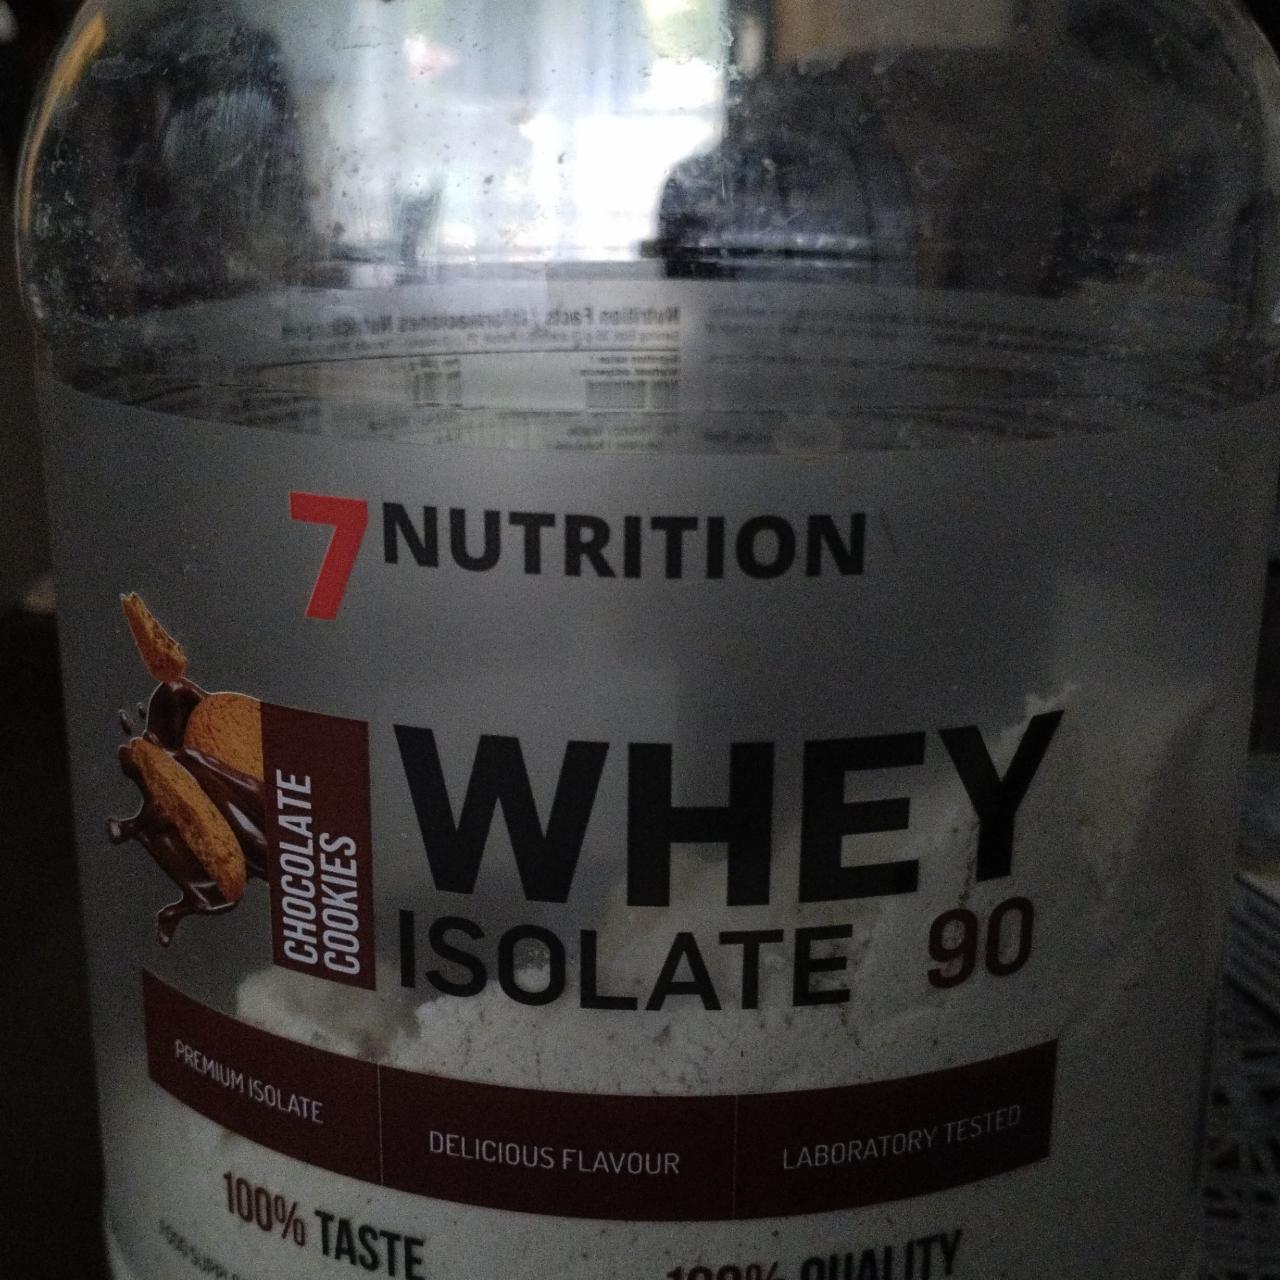 Fotografie - Whey isolate 90 Chocolate cookies 7Nutrition